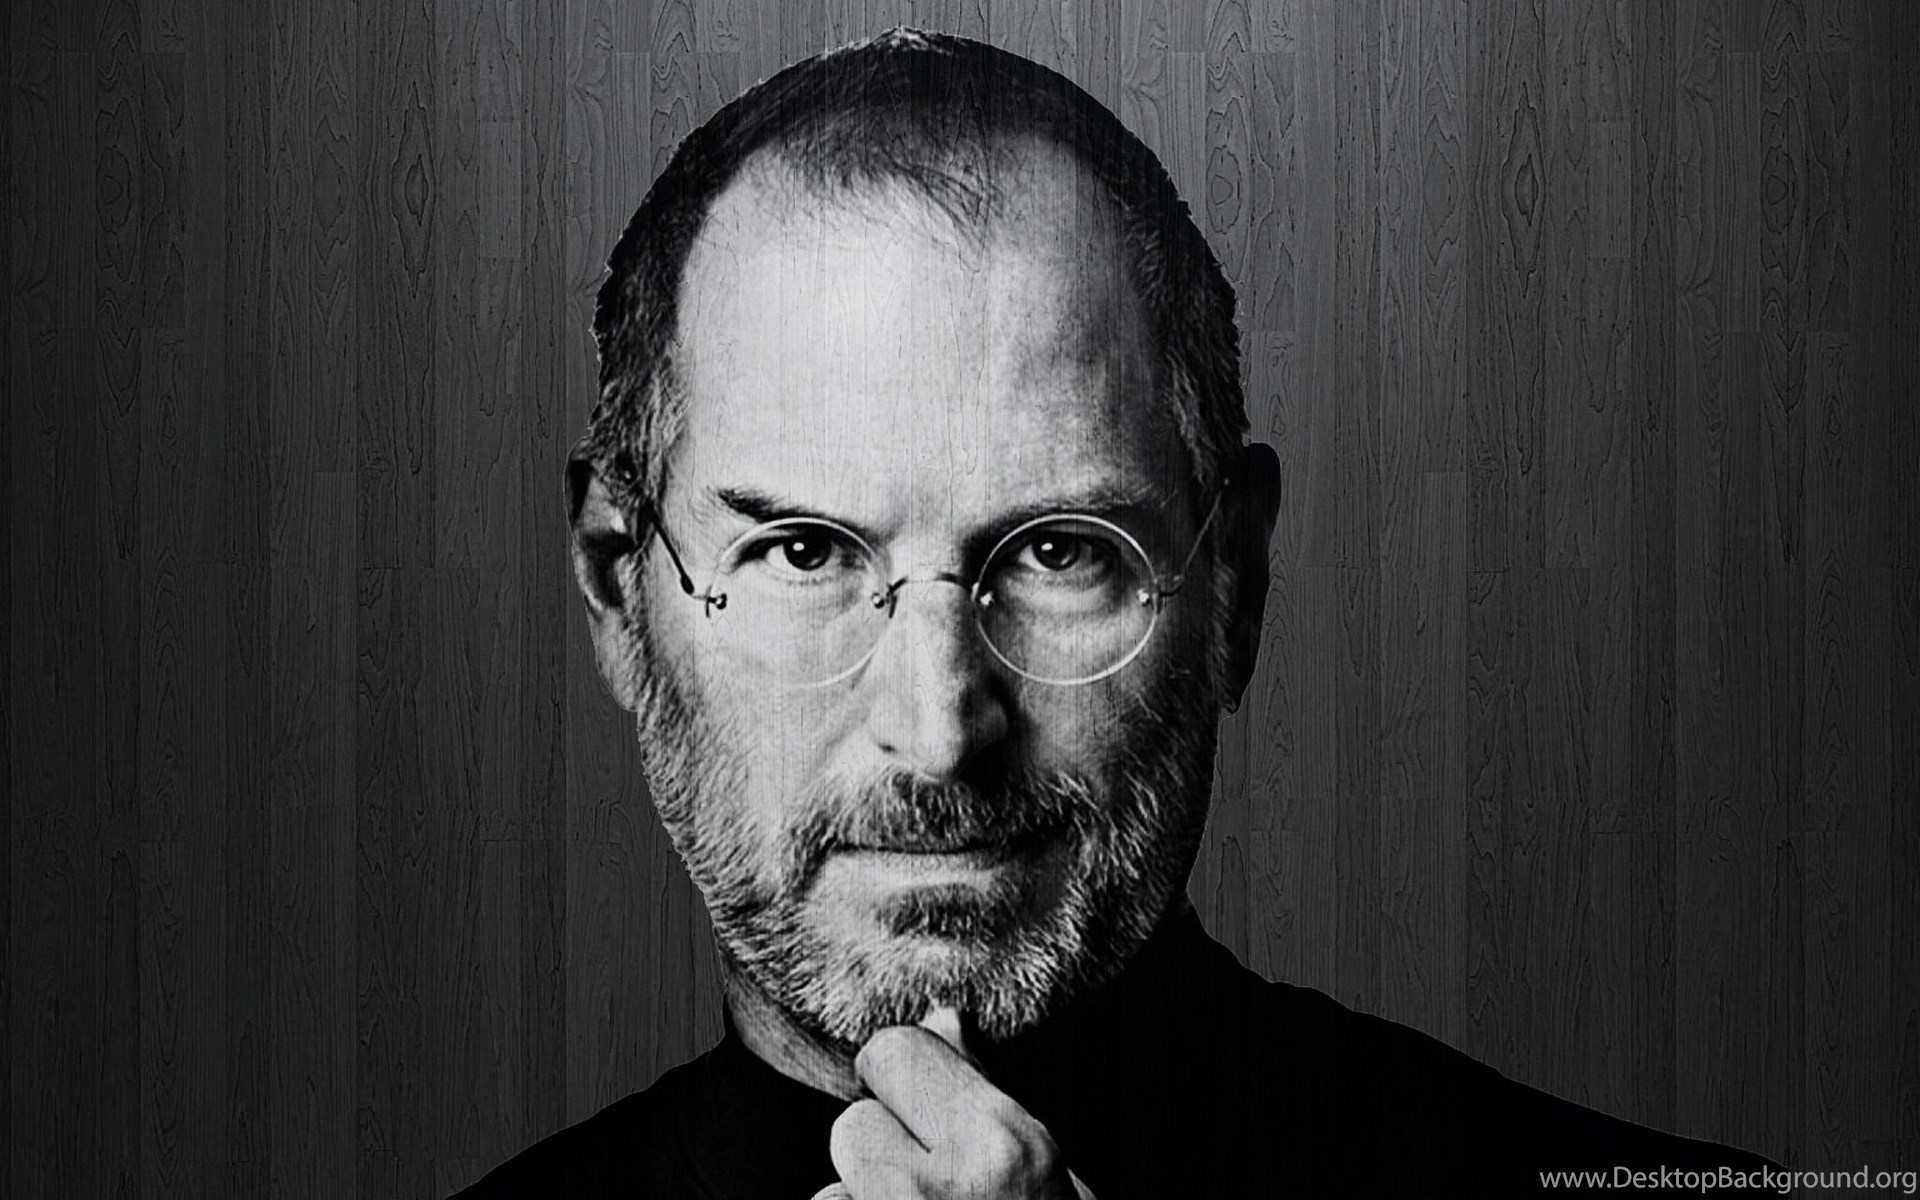 Download Steve Jobs iPad iPhone Wood Wallpapers Photo Album By Lunaoso Popu...